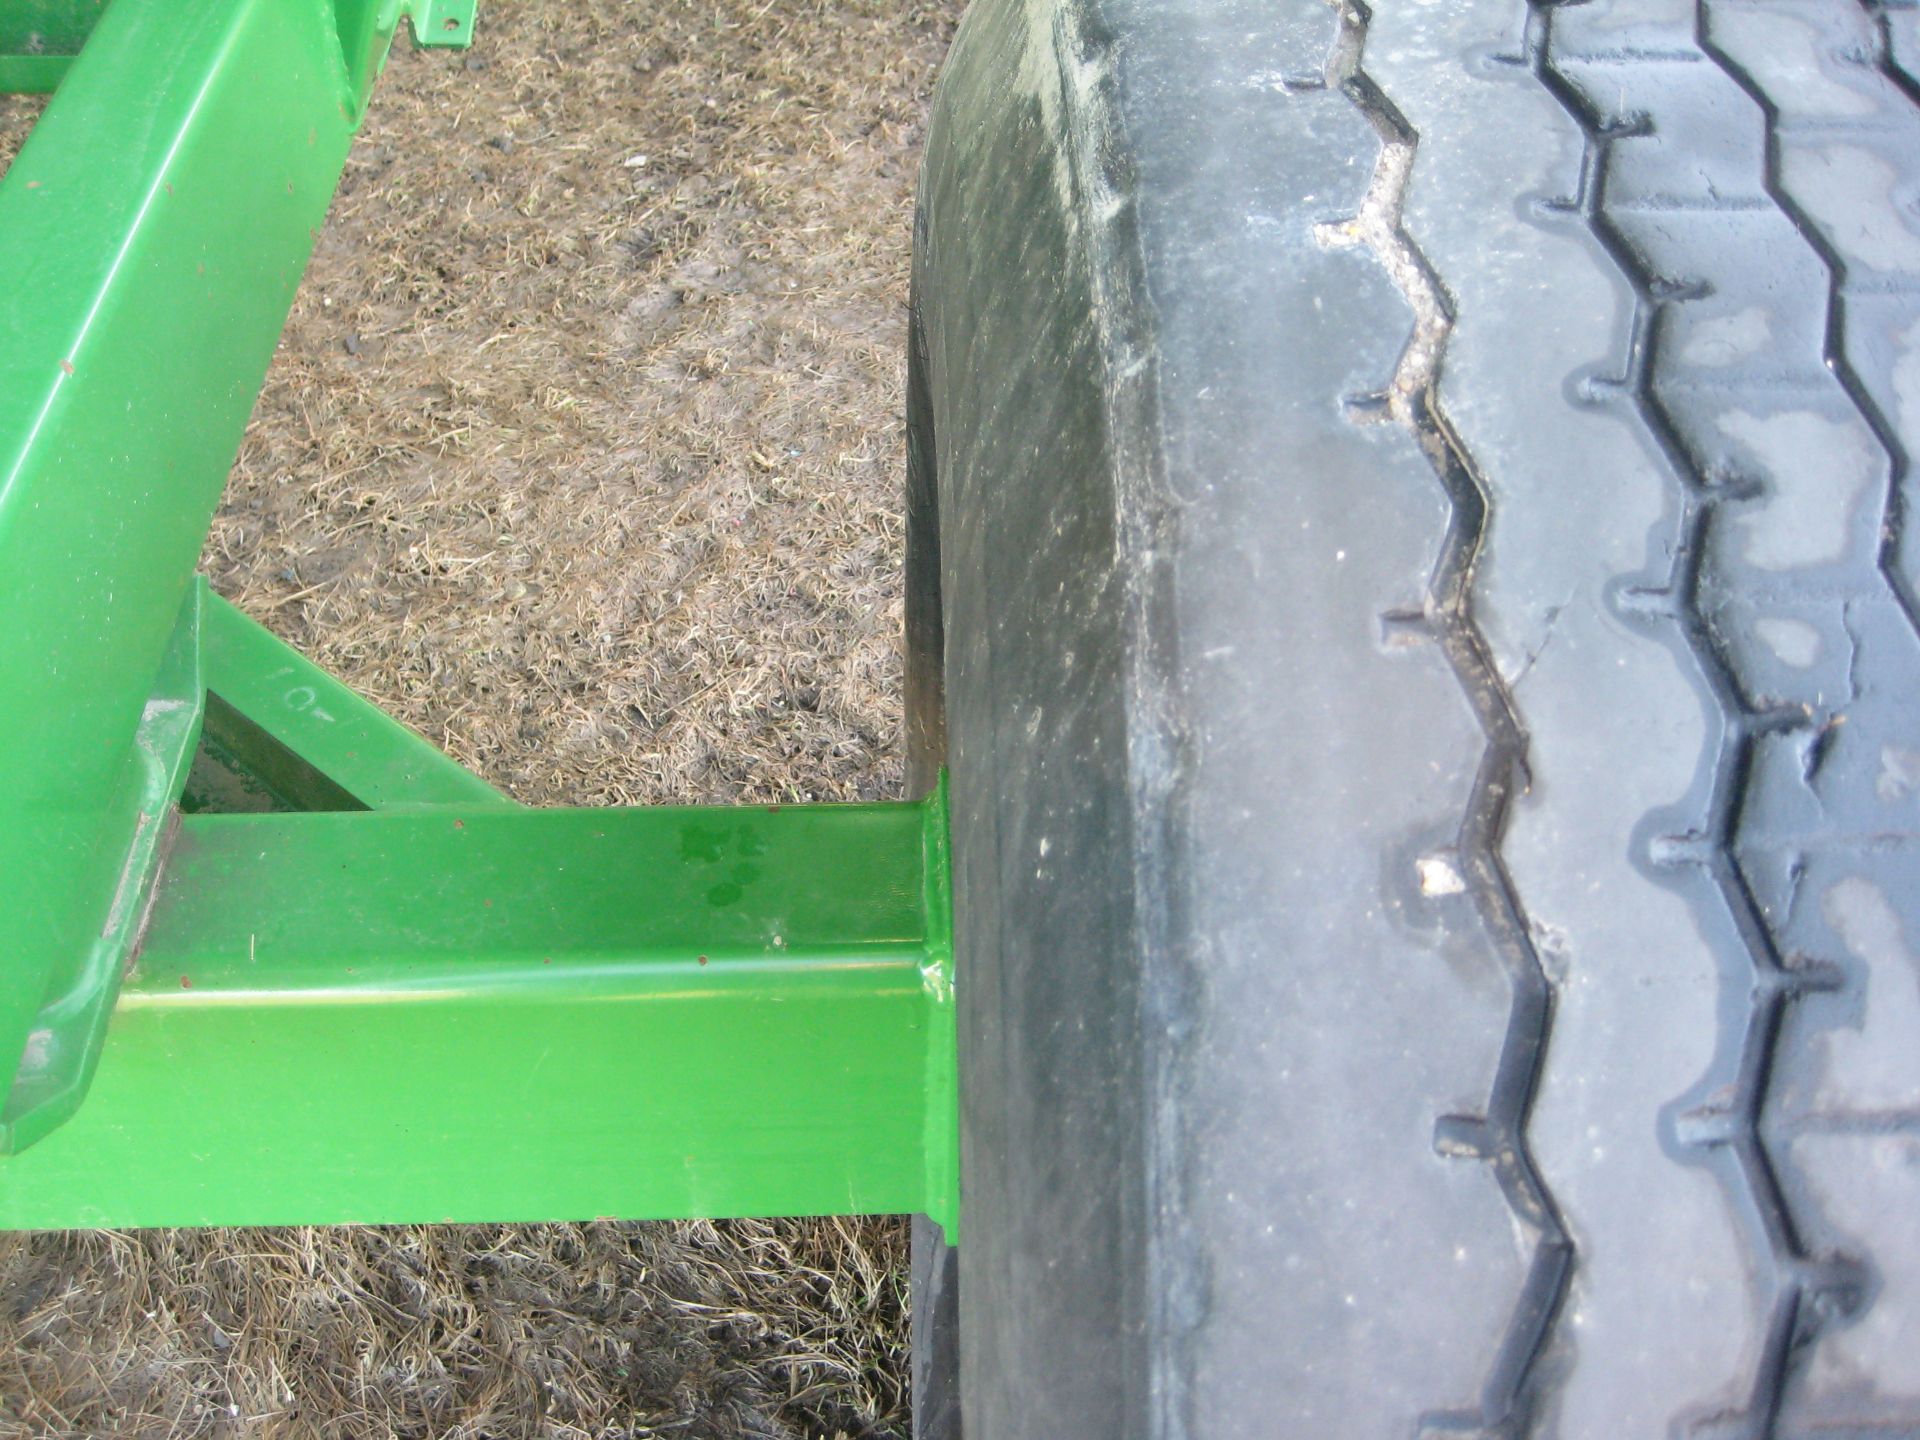 Brent 540 Gravity Wagon, 425-65R/22.5 tires, green - Image 13 of 15